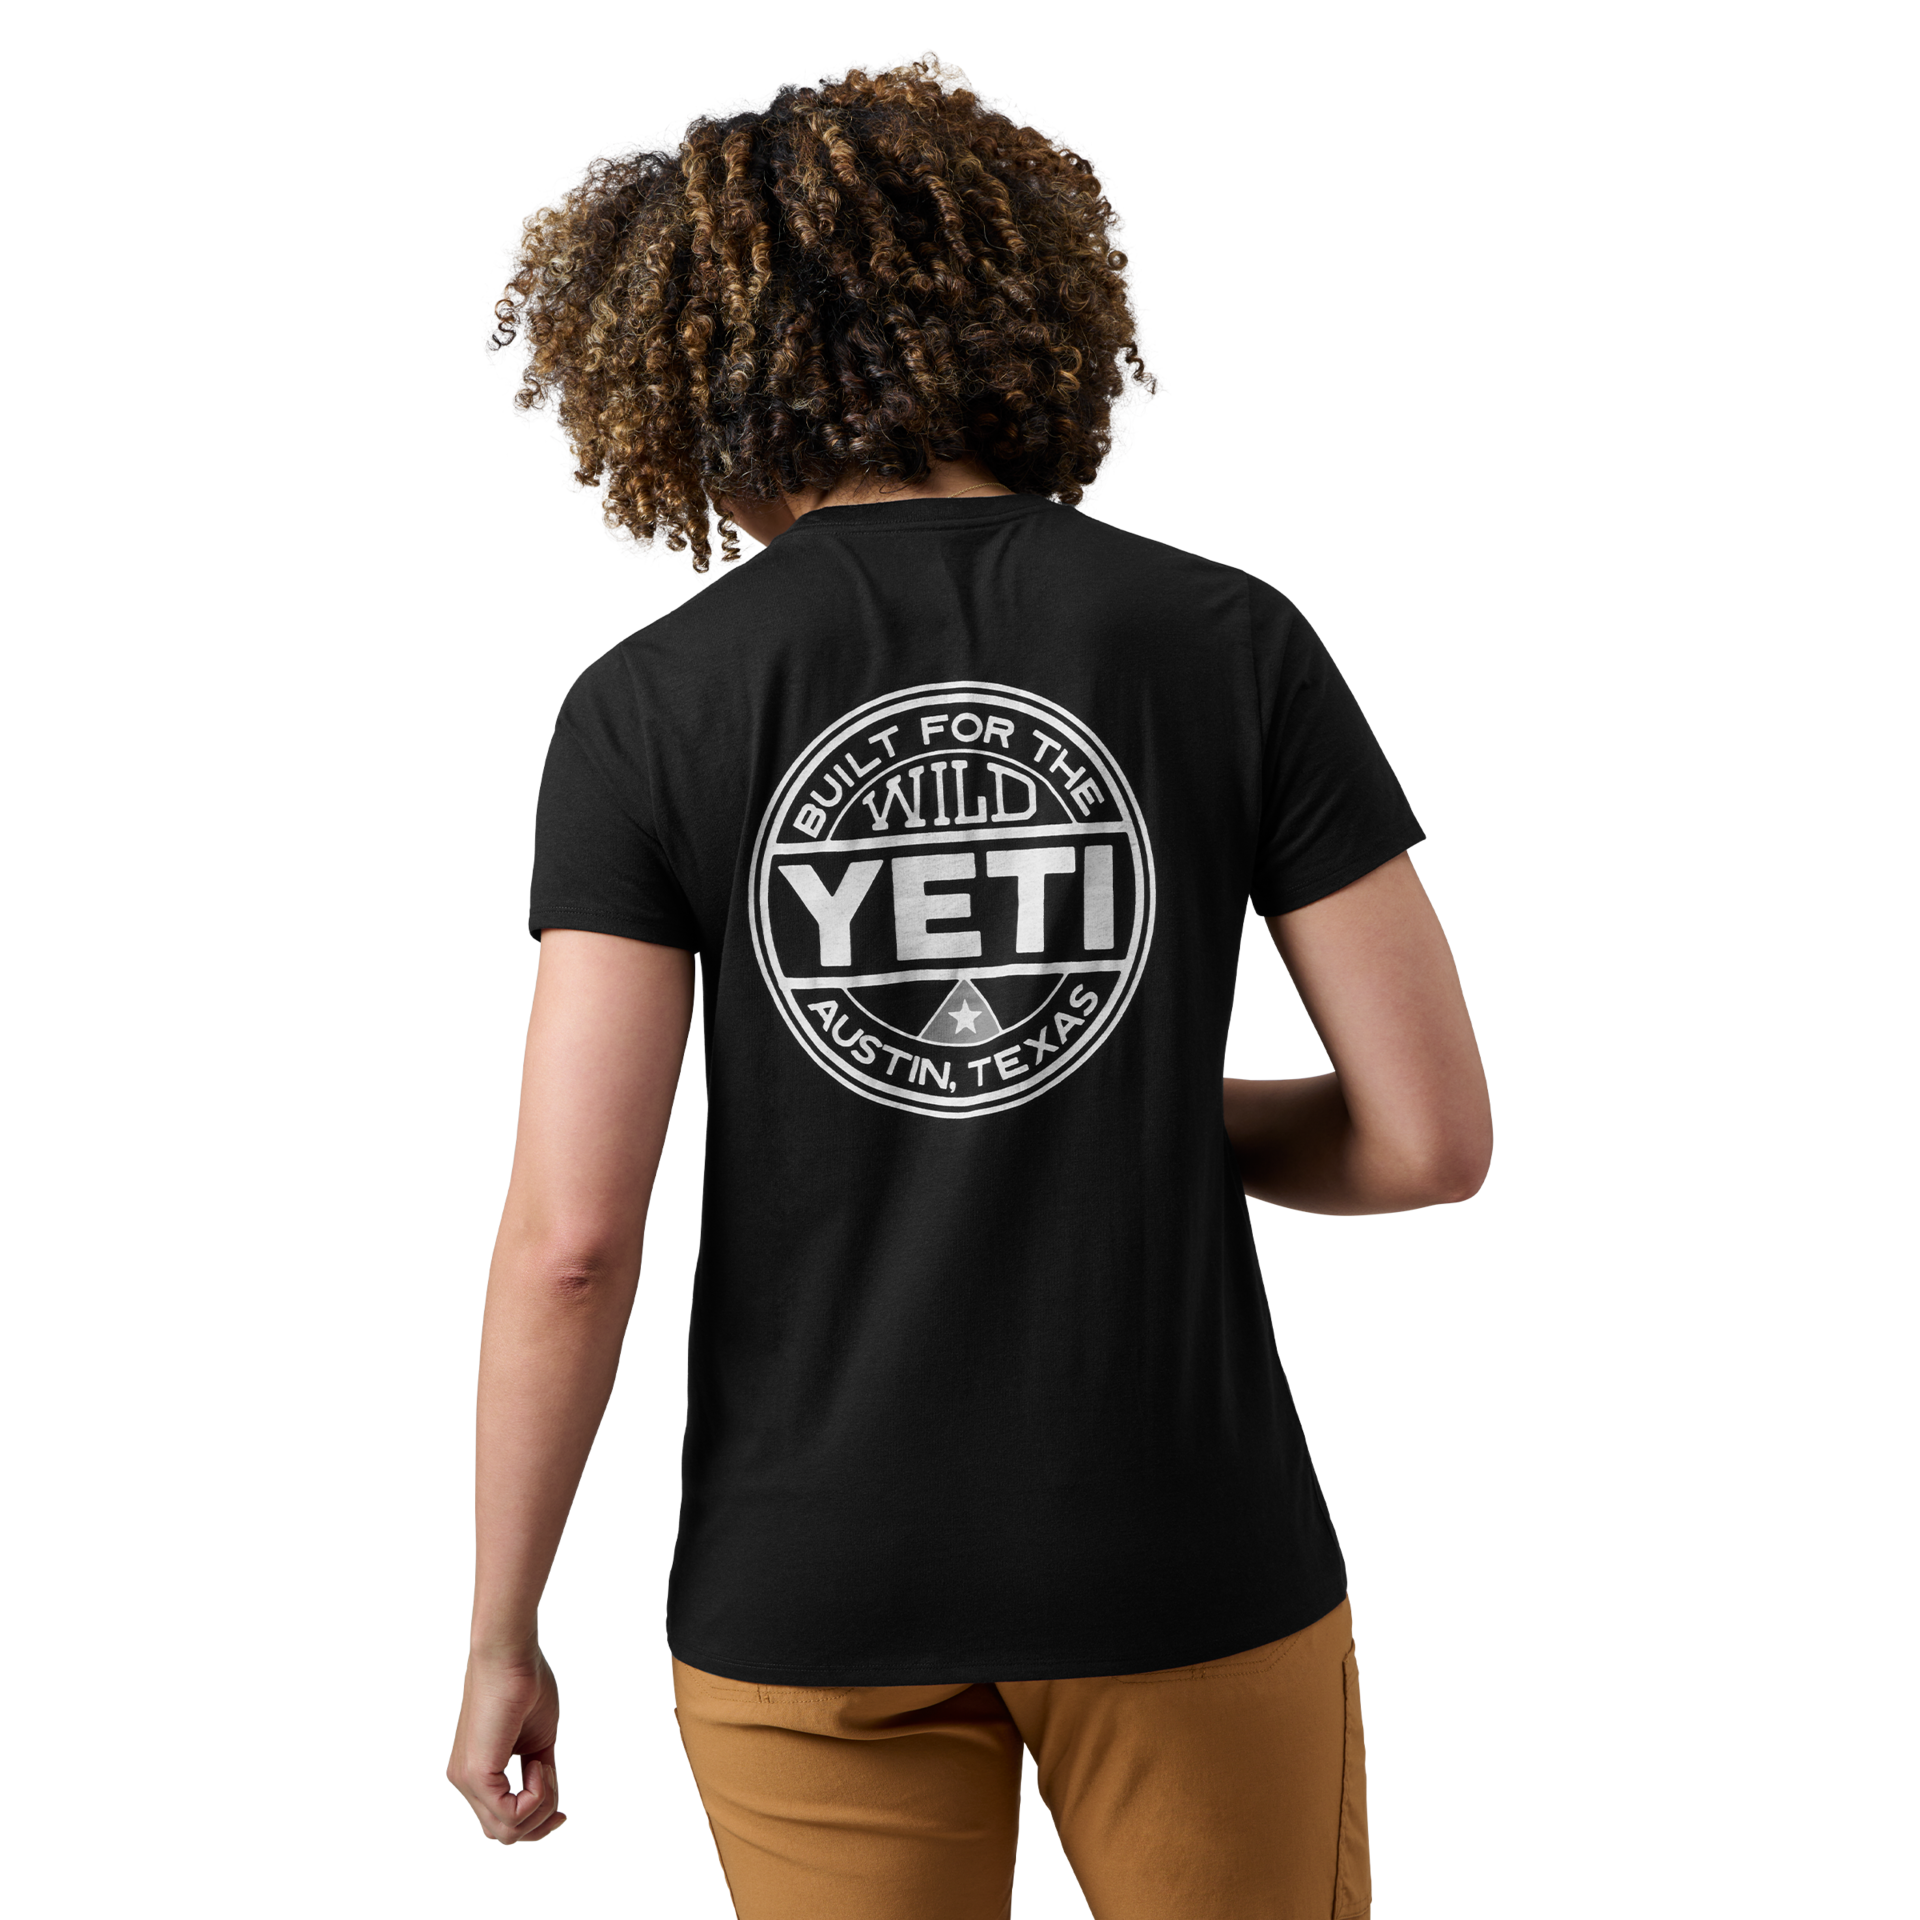 https://yeti-web.imgix.net/4cd60cceb77c7a2b/W-W_SST_BFTW_F22_Black_On-Body_Back_04343_Primary_B_2400x2400.png?auto=format